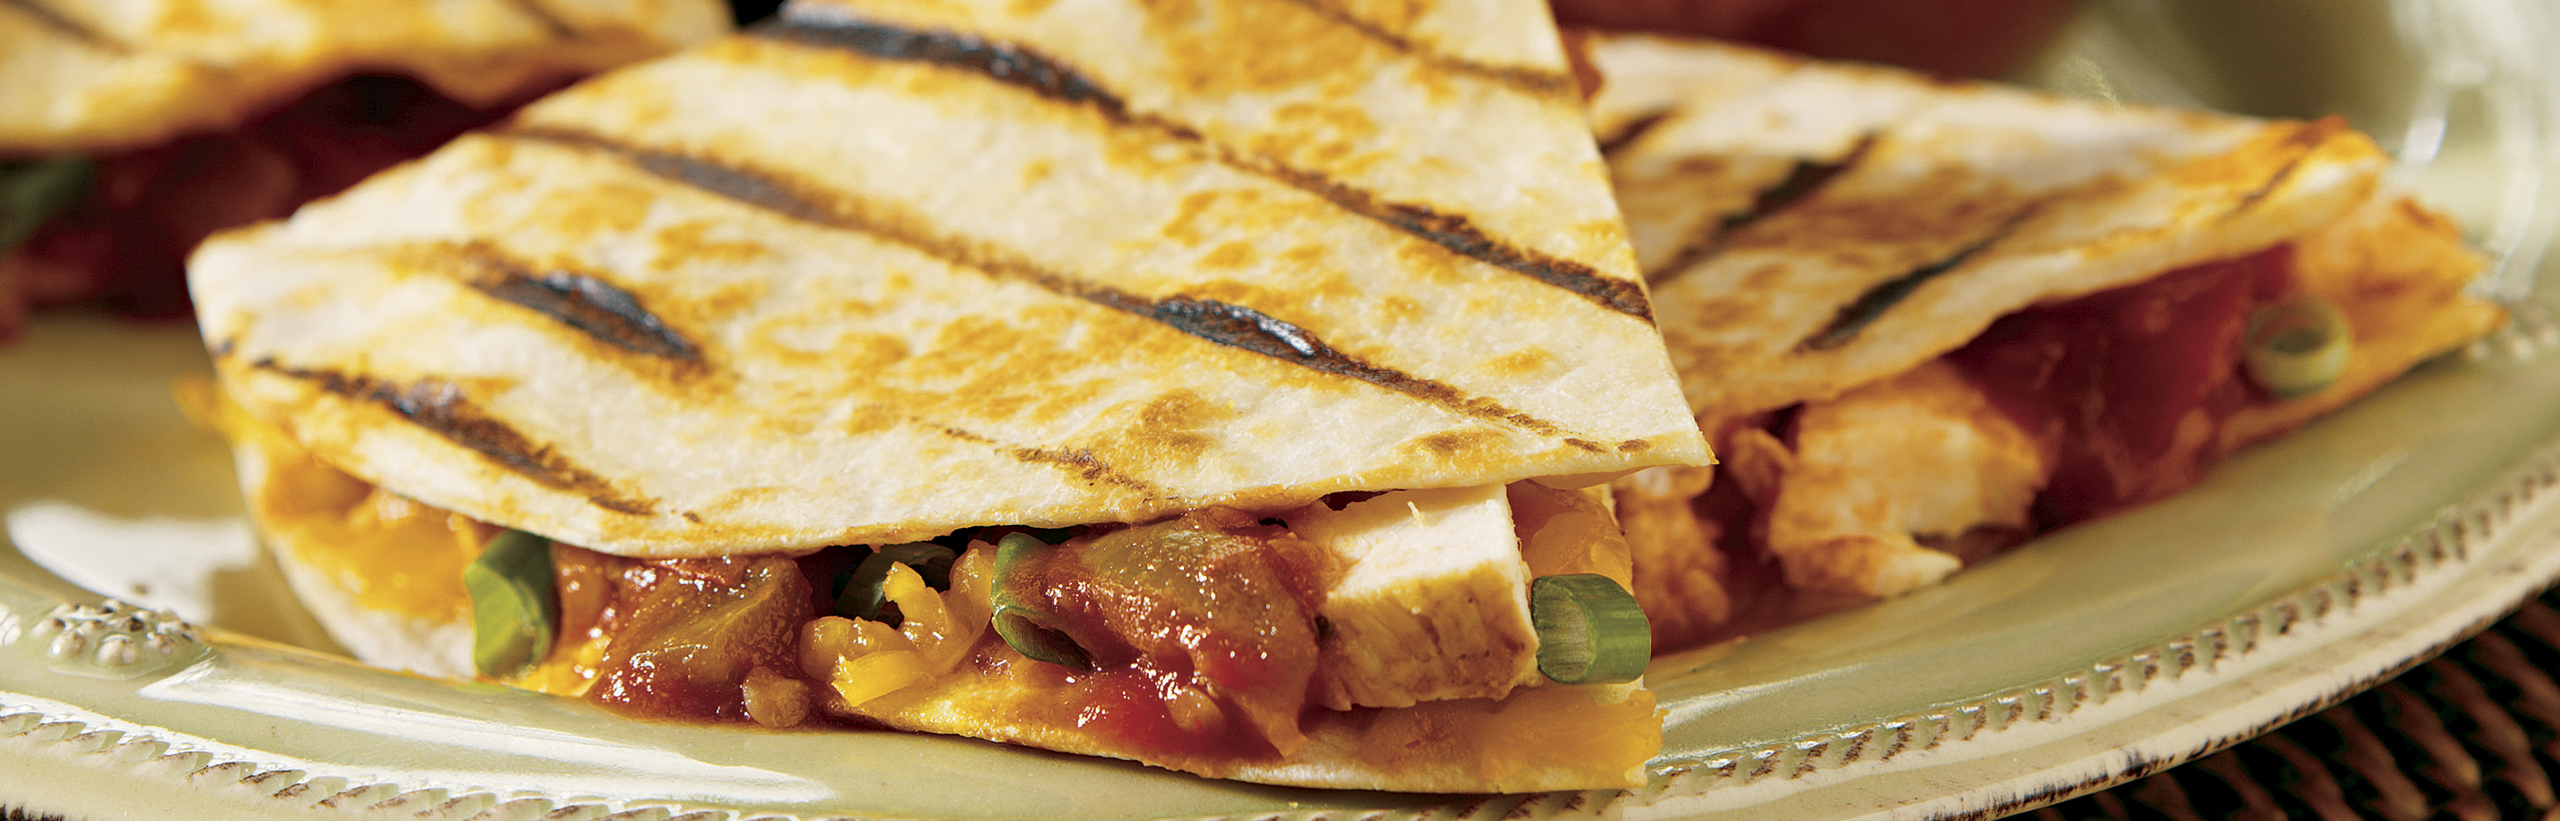 Fritid Mentalt Egnet Grilled Chicken Quesadillas Recipe | Pace® Foods